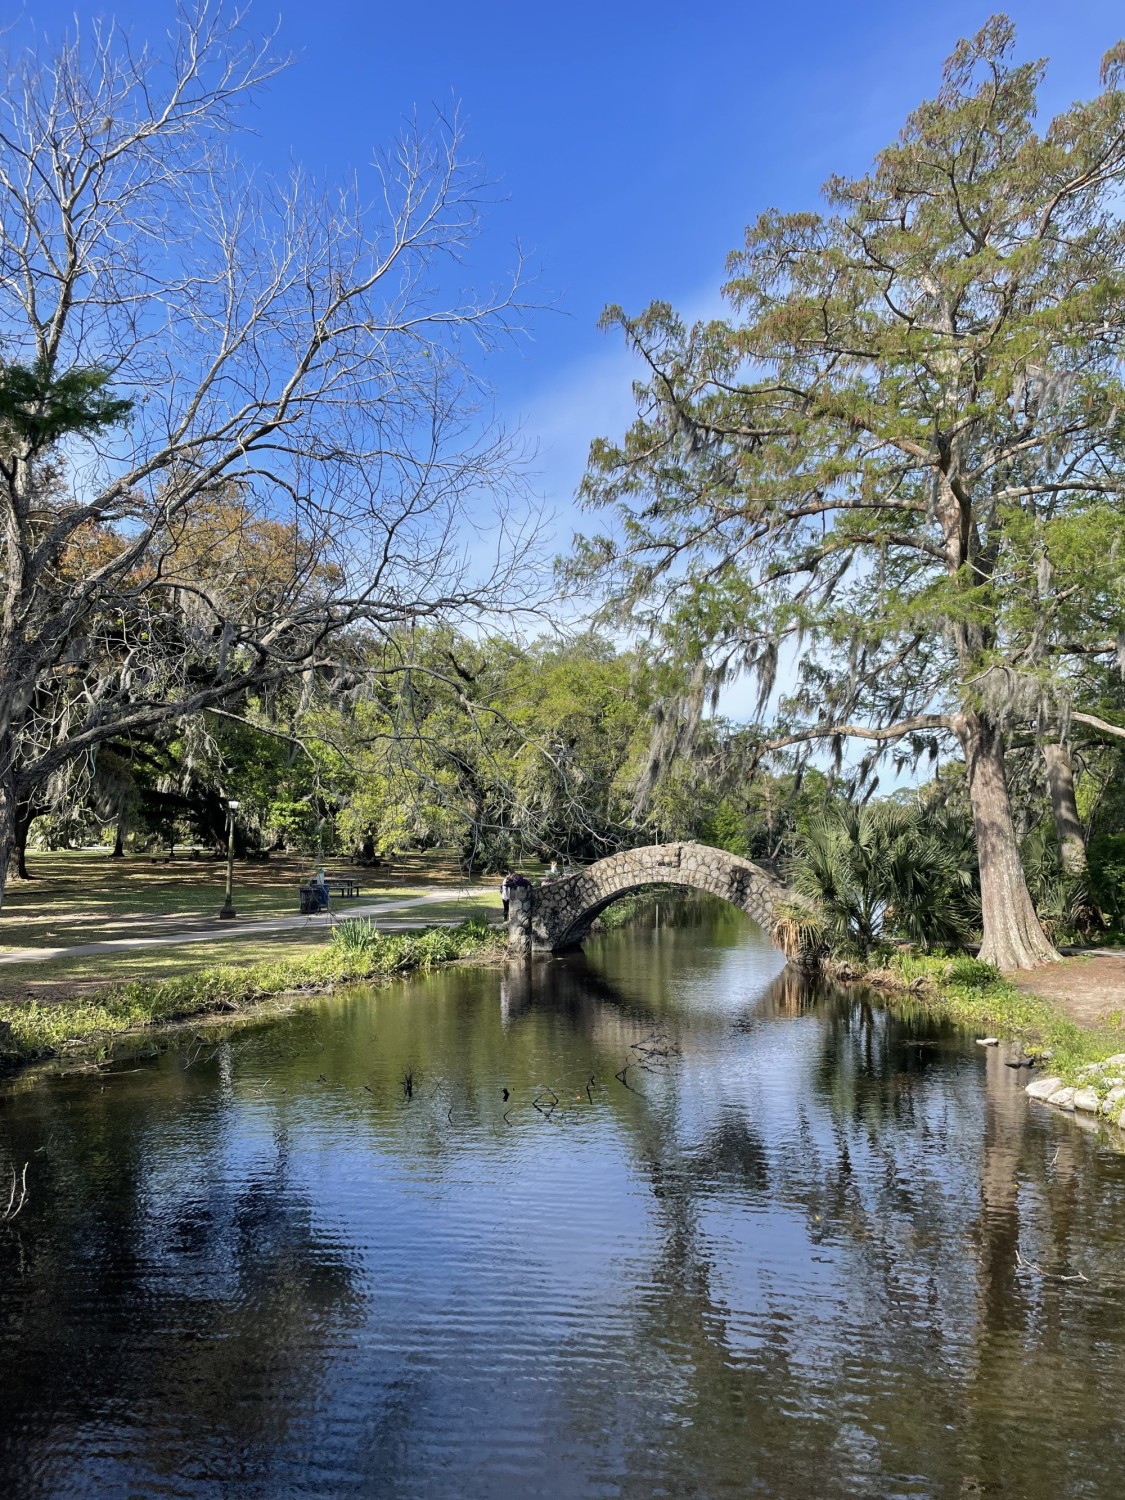 A calm lake with a stone arched bridge, trees, grass and a blue sky in the background. 